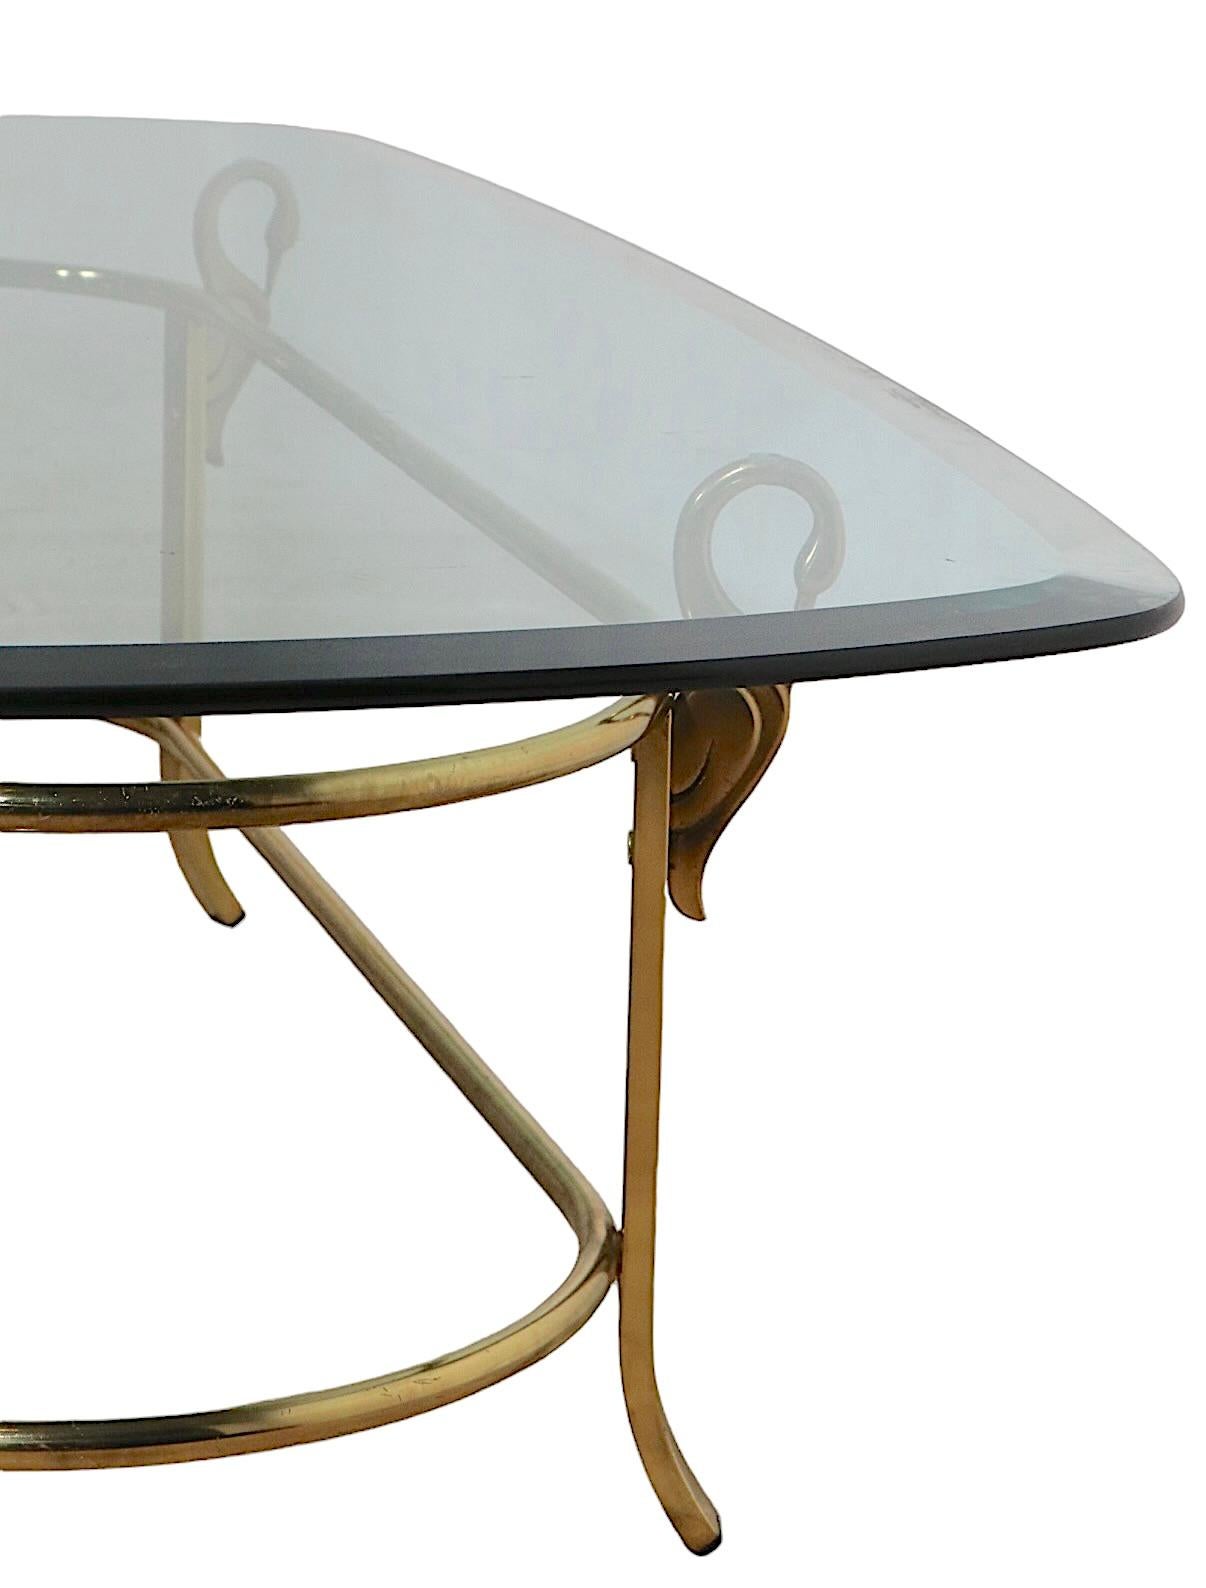 Oval Beveled Glass Top Coffee Table with Brass Swan Base Att. to La Barge 6